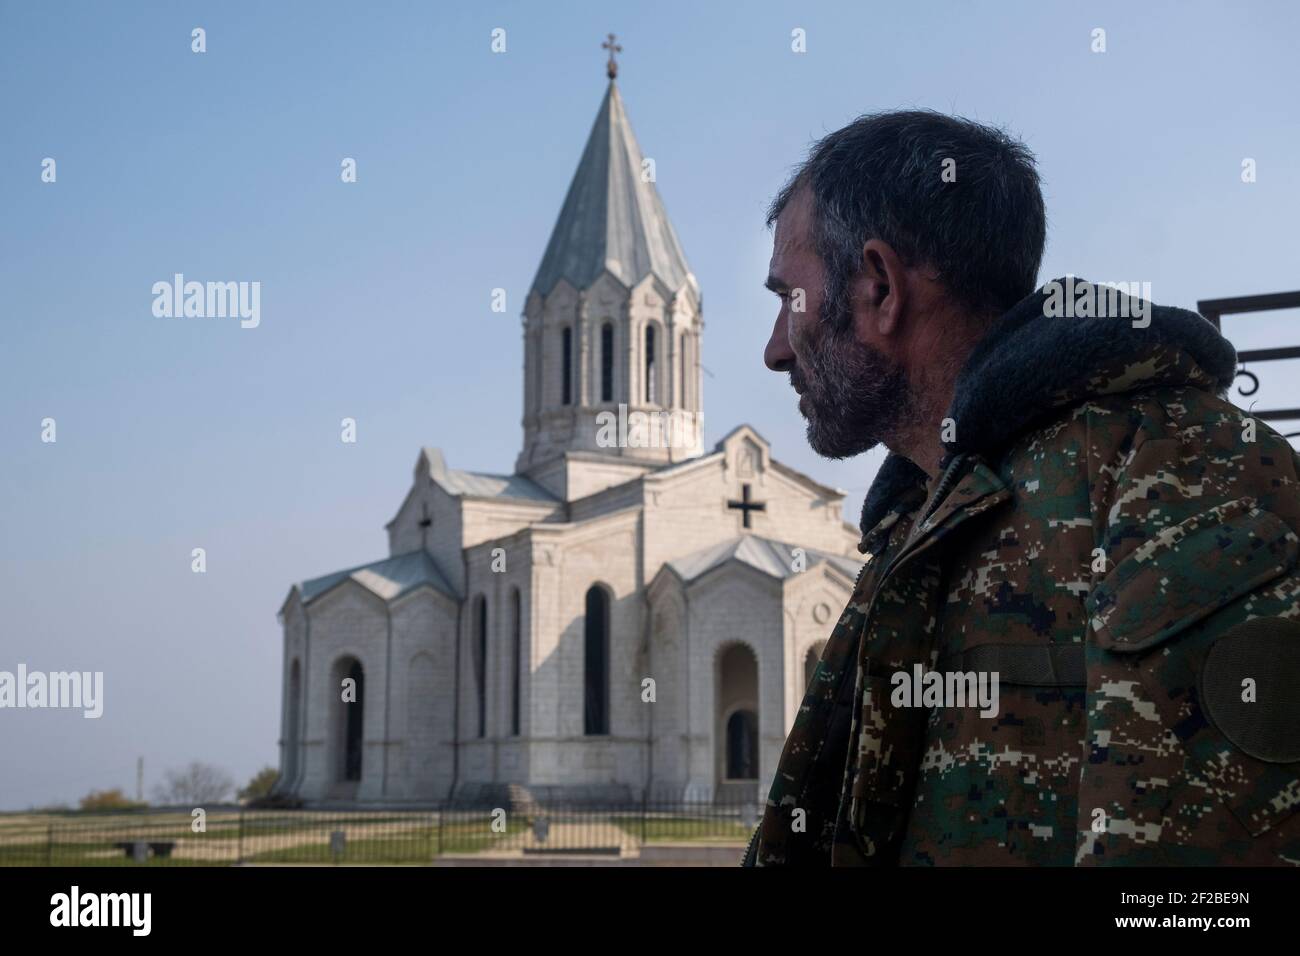 SHUSHI, NAGORNO KARABAKH - NOVEMBER 03: An ethnic Armenian wearing a military fatigue stands in front of the Armenian Apostolic Holy Savior Cathedral commonly referred to as Ghazanchetsots during a military conflict between Armenian and Azerbaijani forces over the disputed Nagorno-Karabakh region known also as the Artsakh Republic in the town of Shushi or Shusha in the self-proclaimed Republic of Artsakh or Nagorno-Karabakh, de jure part of the Republic of Azerbaijan on November 03 2020. The fighting between Armenia and Azerbaijan over Nagorno-Karabakh known also as the Artsakh Republic re-eru Stock Photo